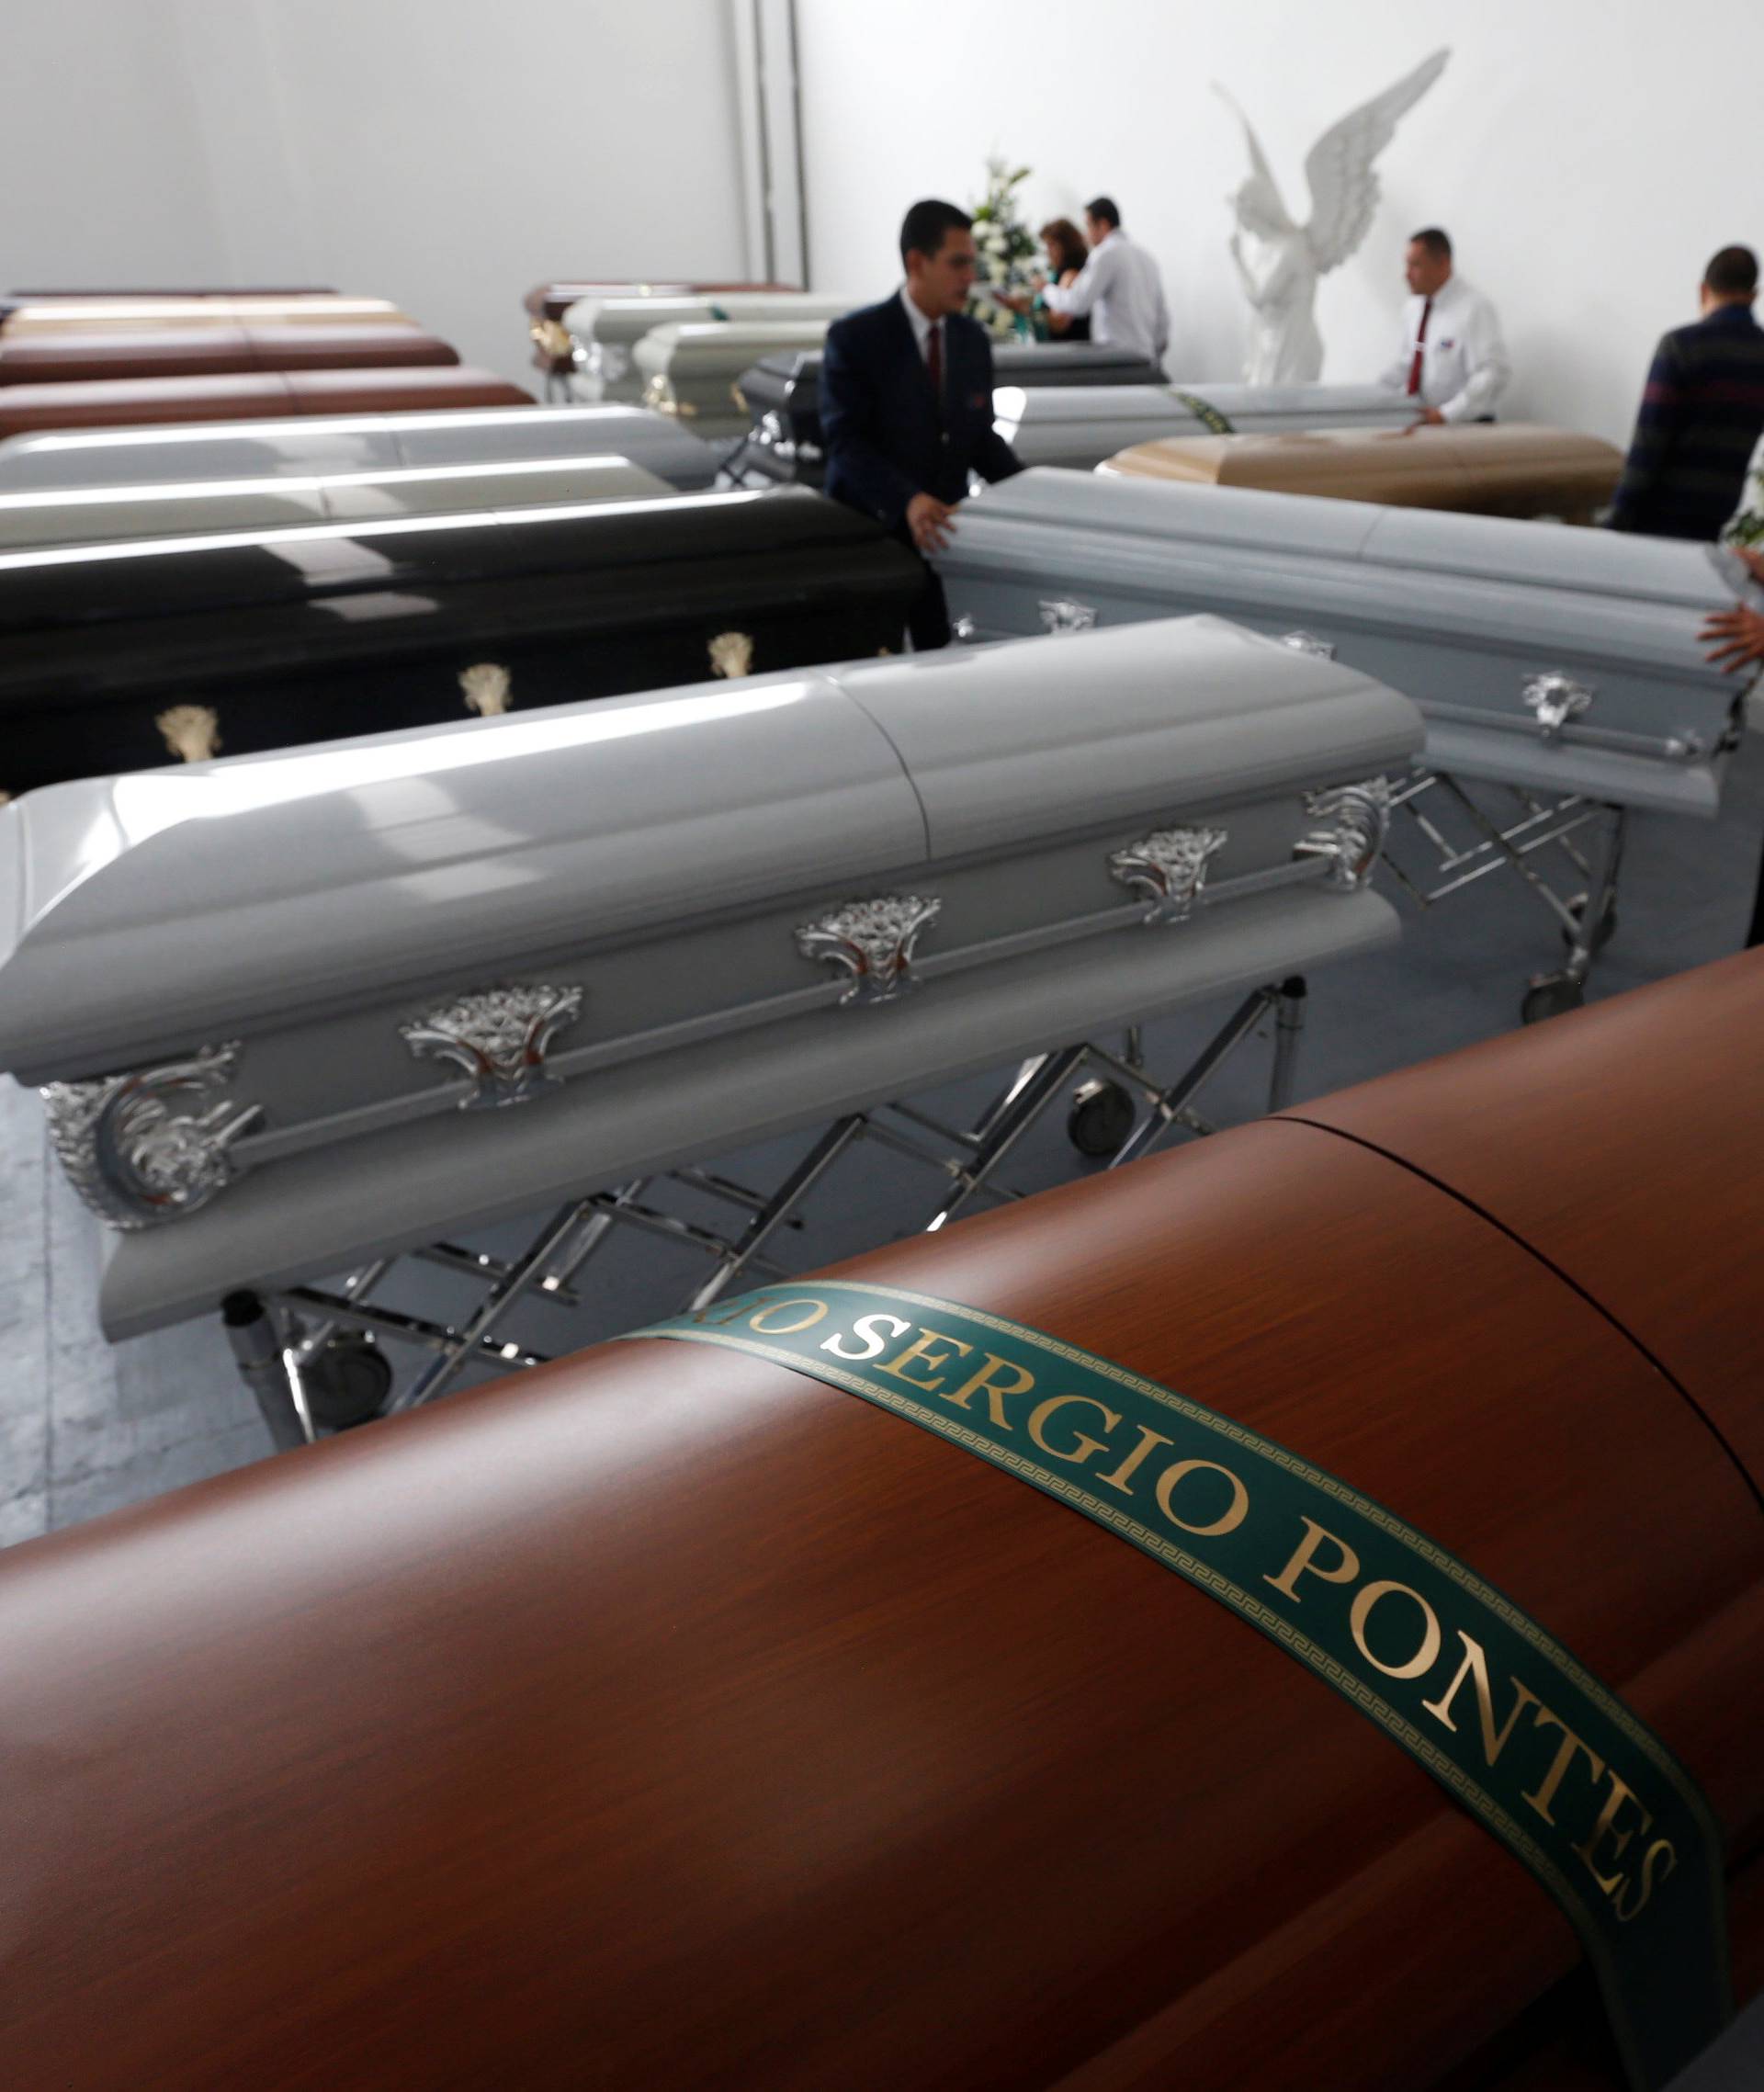 Funeral workers arrange coffins near the coffin holding the remains of Pontes who died along with others in an accident of the plane that crashed into the Colombian jungle with Brazilian soccer team Chapecoense onboard, in Medellin